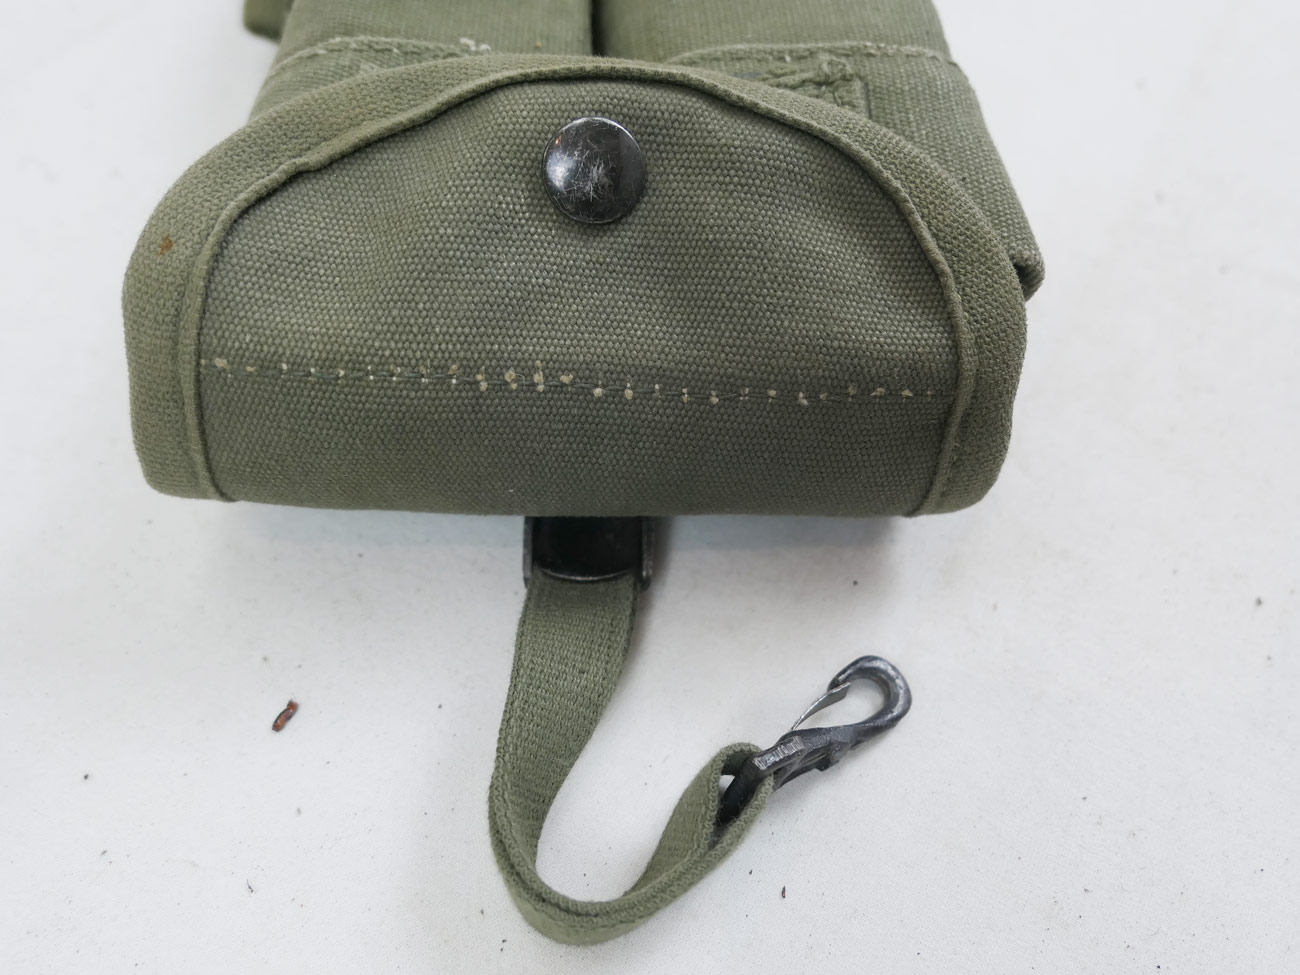 US Pouch 30rd Magazintasche Tommy